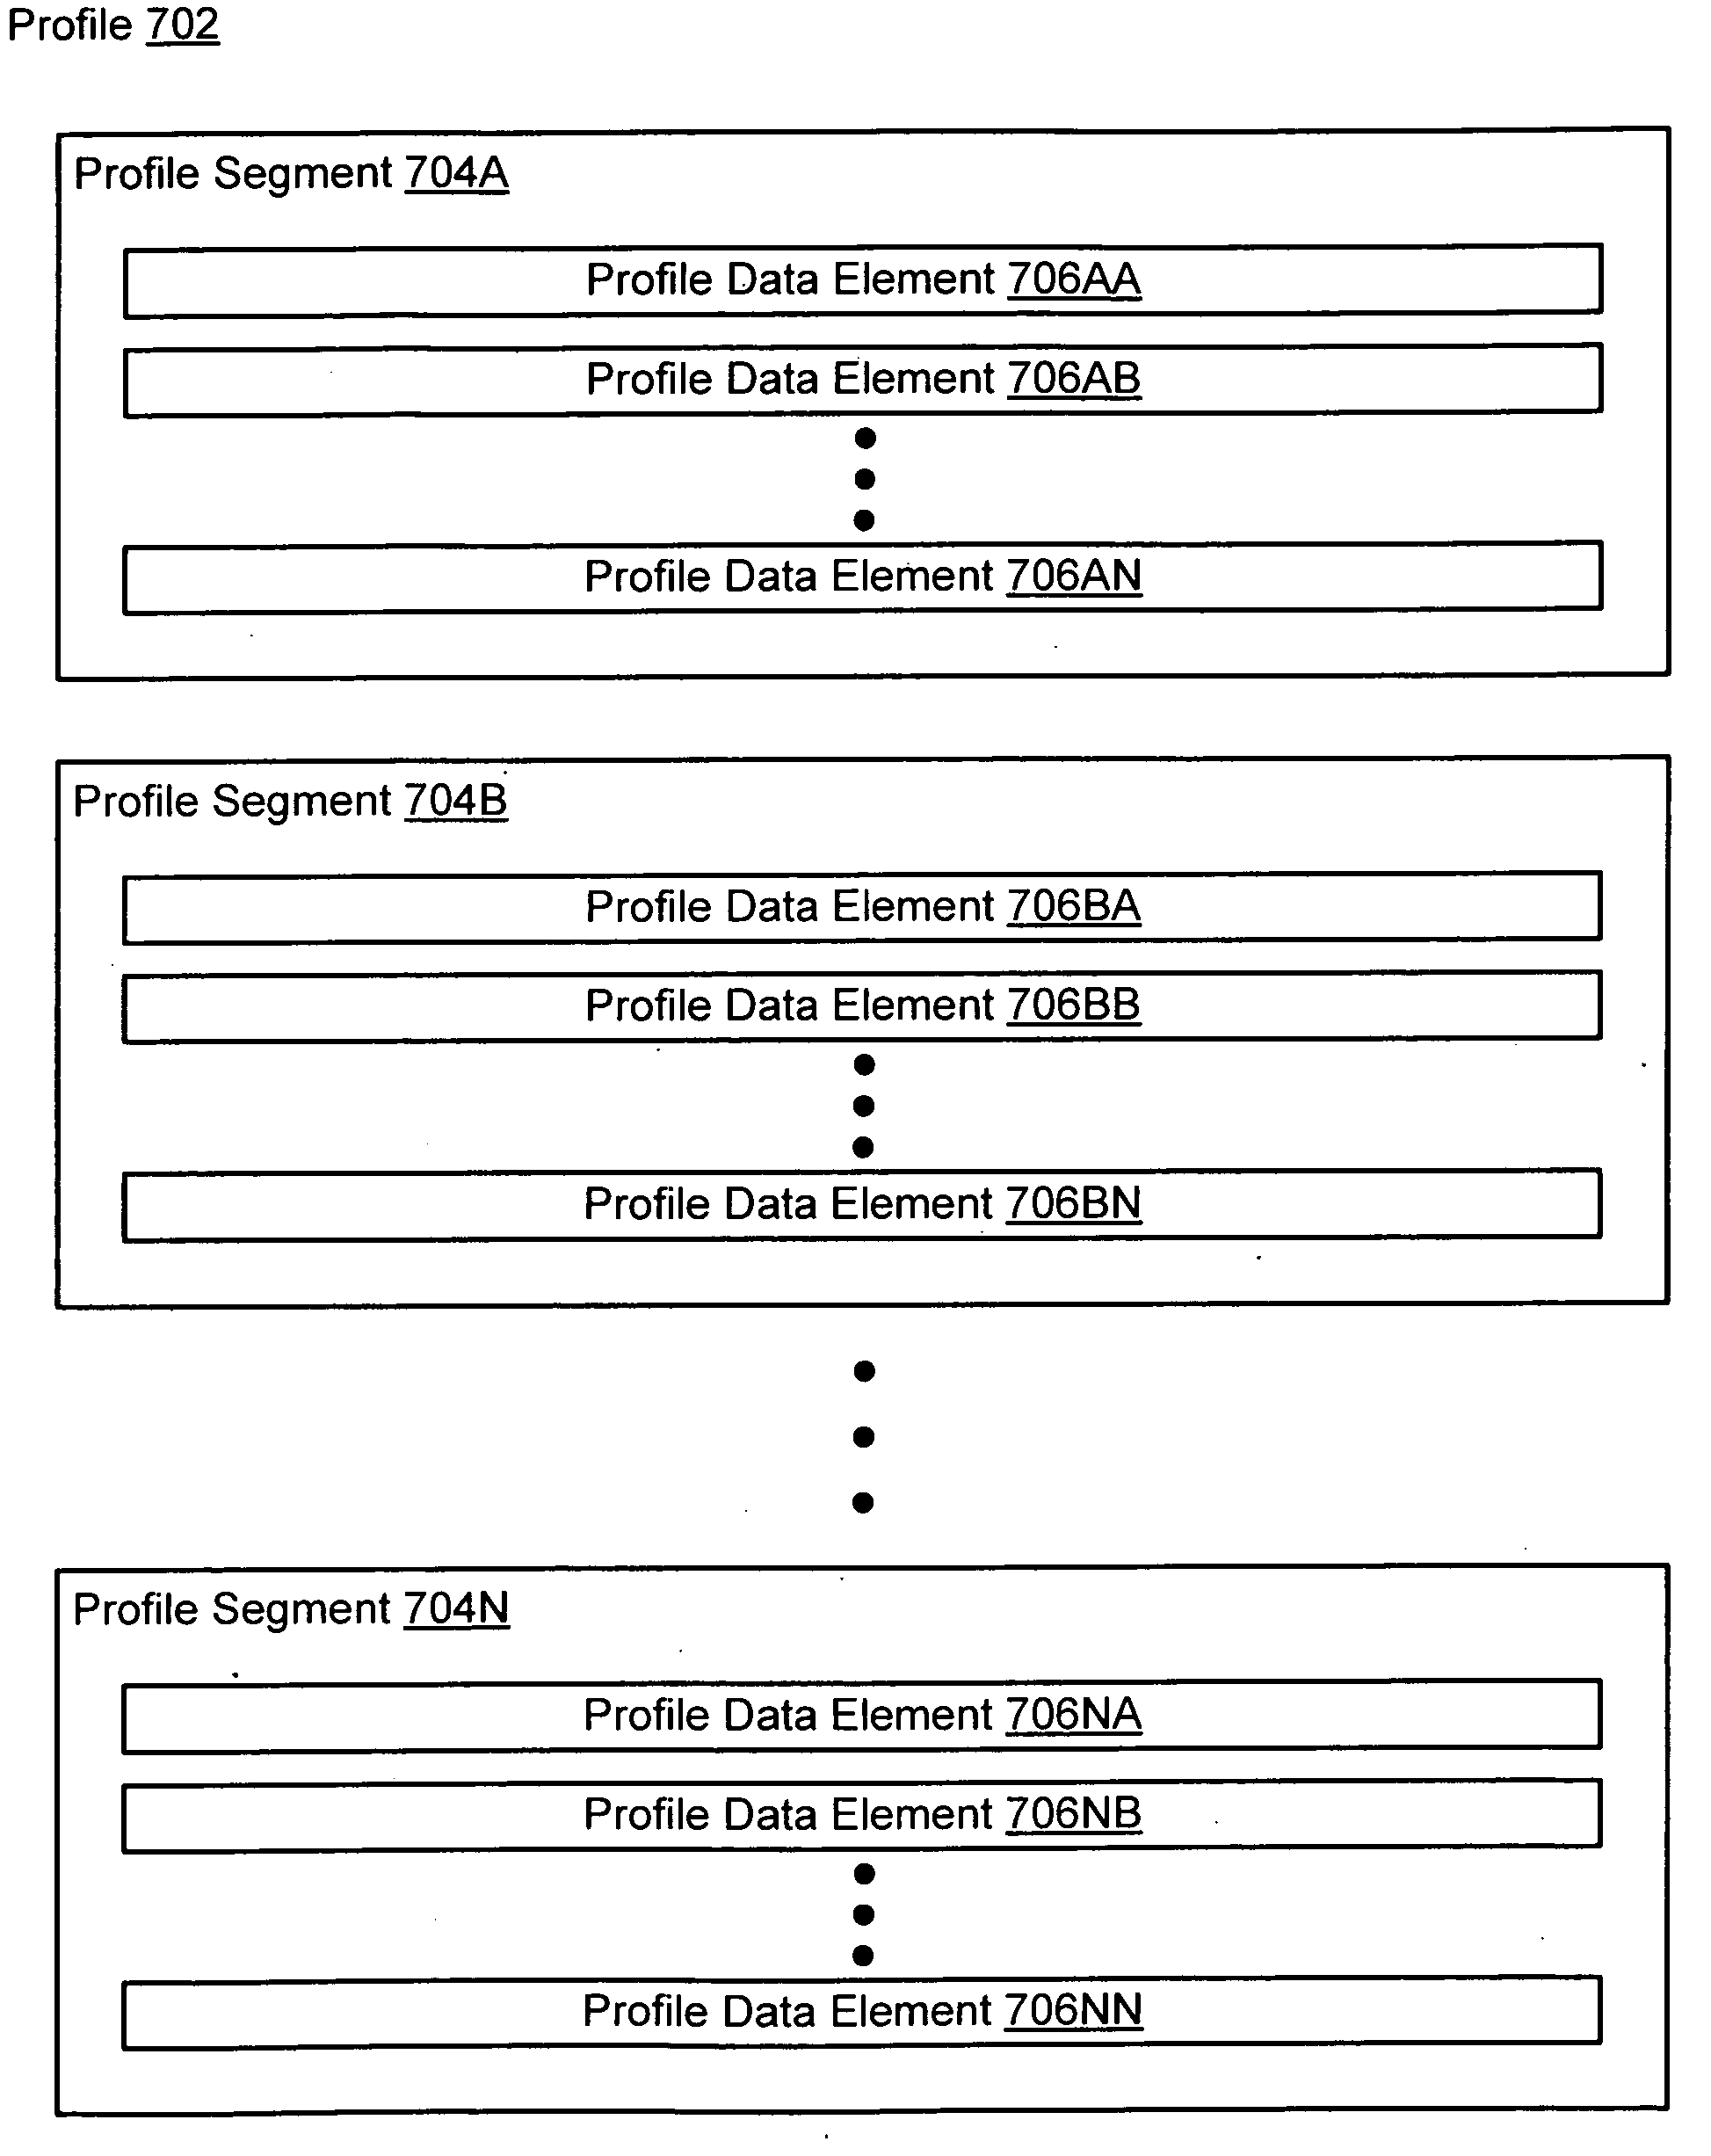 System and method for providing universal profiles for networked clusters